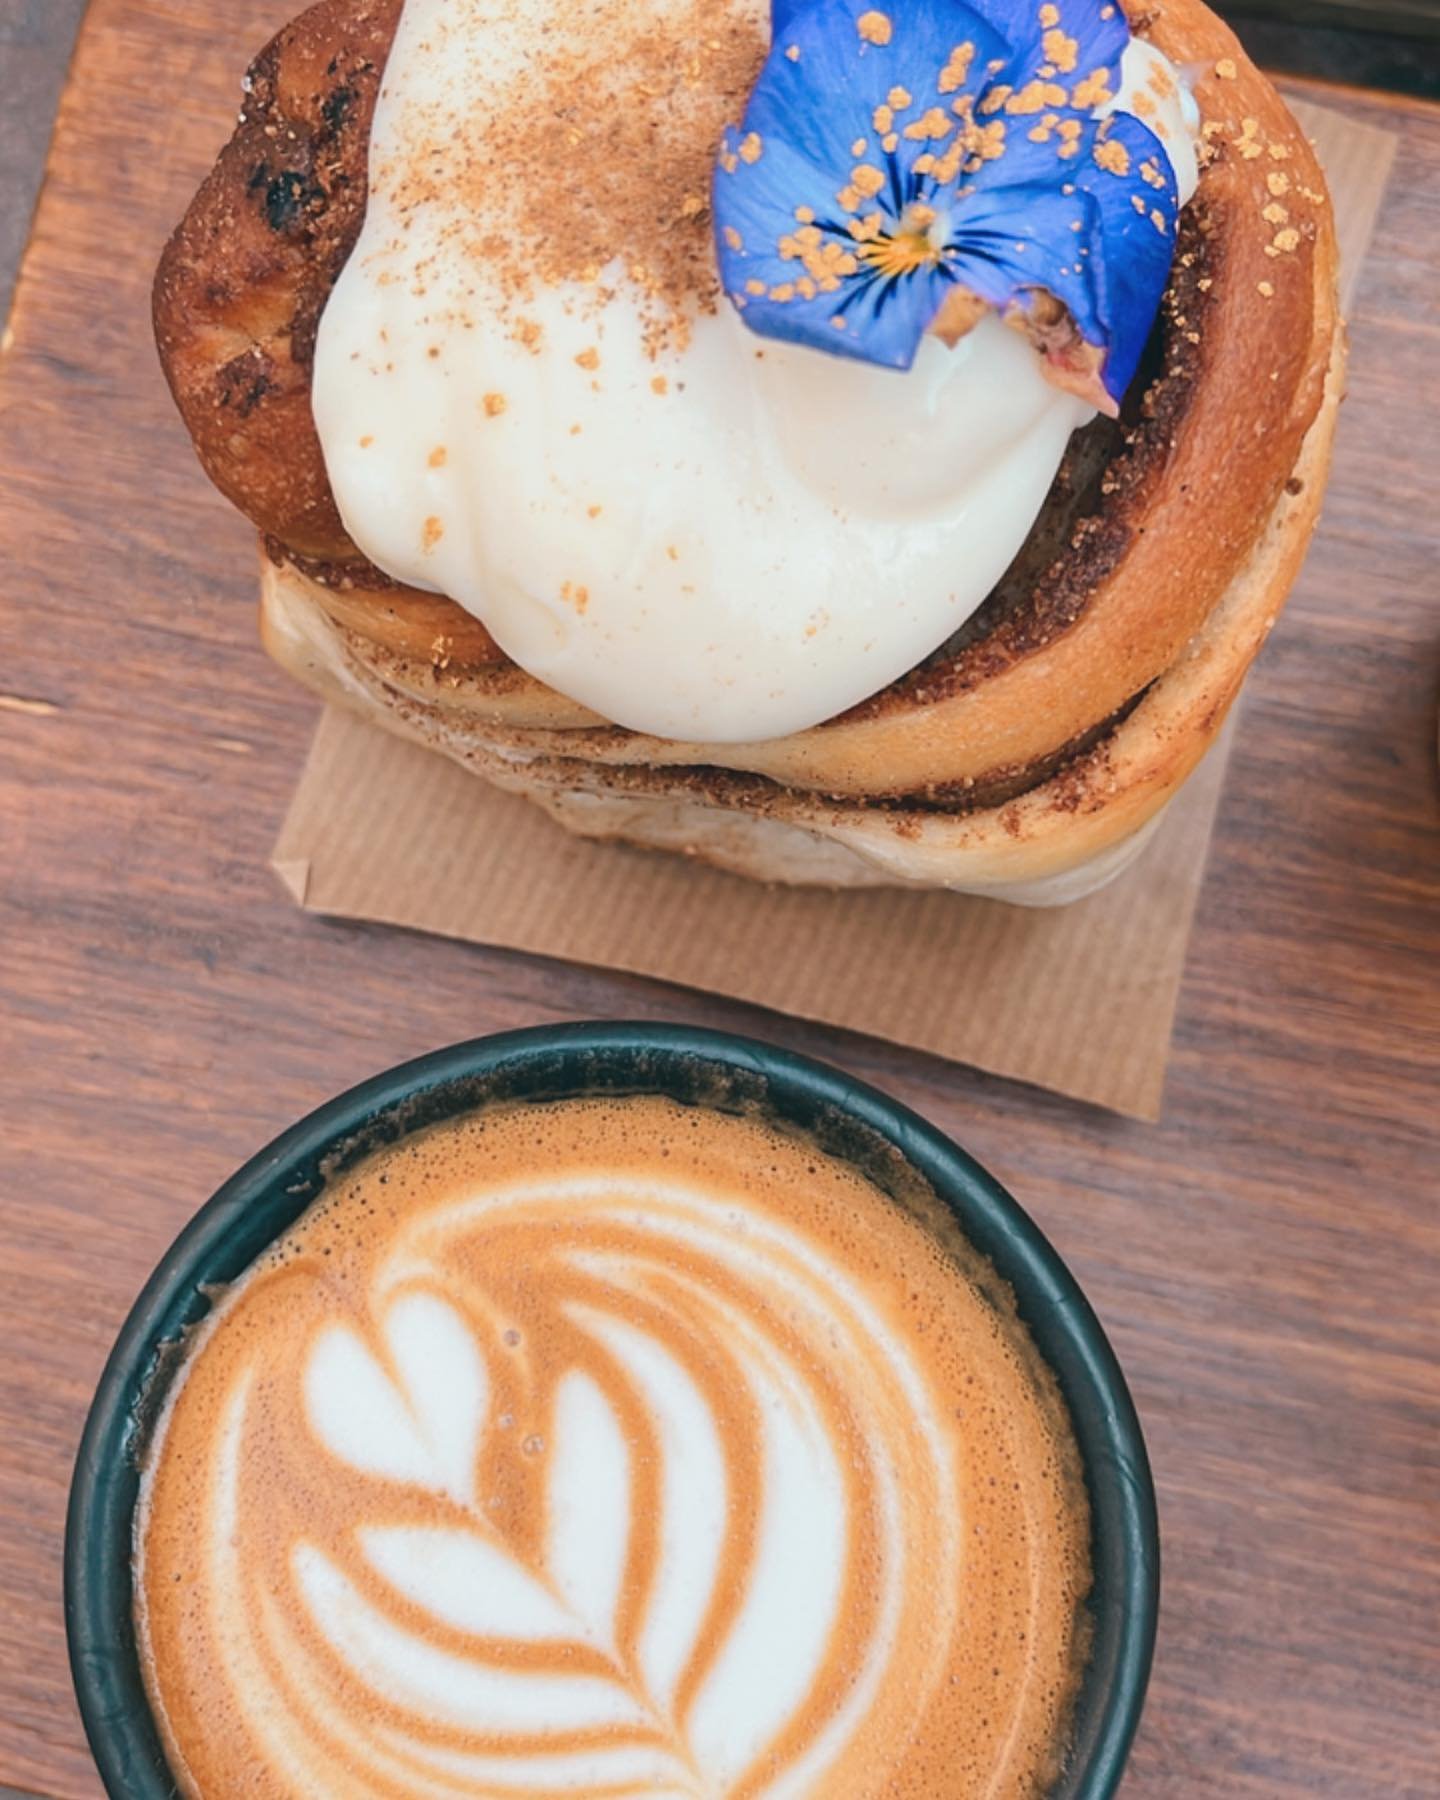 One more day until the weekend!
It&rsquo;s Friday and we like to celebrate, so today we will choose a cinnamon bun, lots of frosting and a strong coffee. 🤩 

Un dia m&eacute;s fins al cap de setmana!
&Eacute;s divendres i ens agrada celebrar-ho, aix